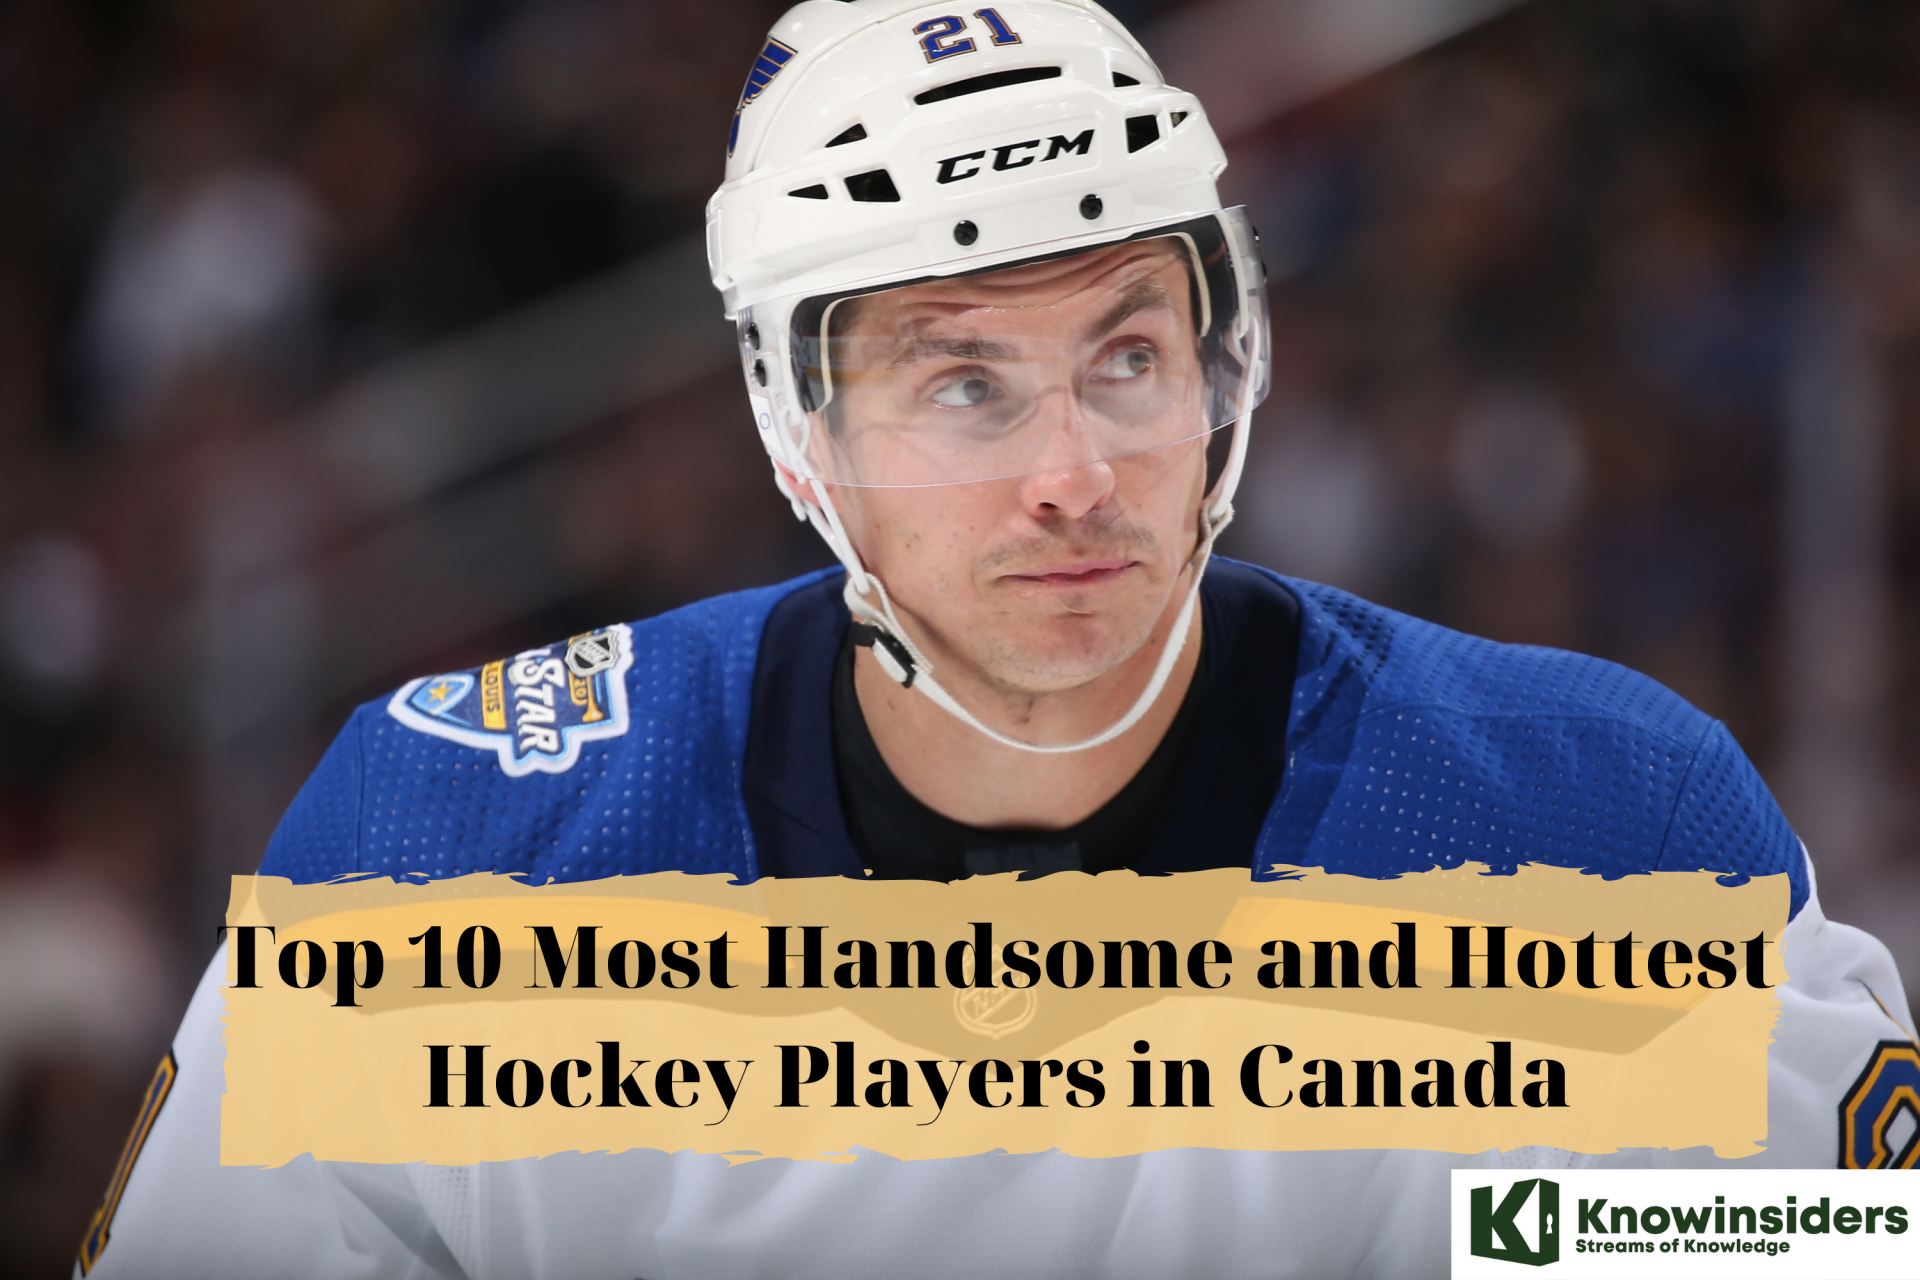 Top 10 Most Handsome Hockey Players in Canada for 2021/2022